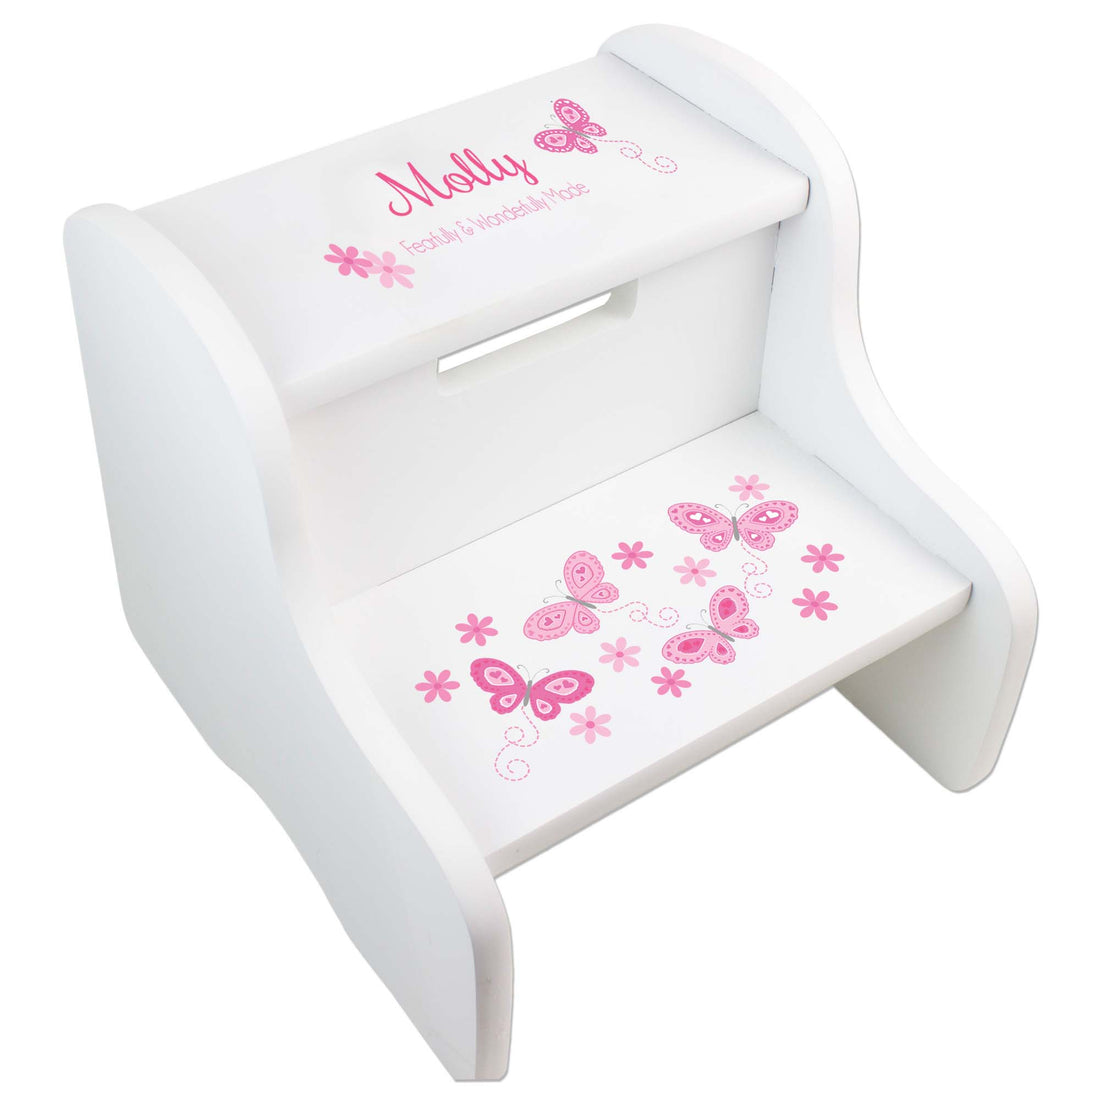 Personalized White Step Stool With Pink Butterflies Design